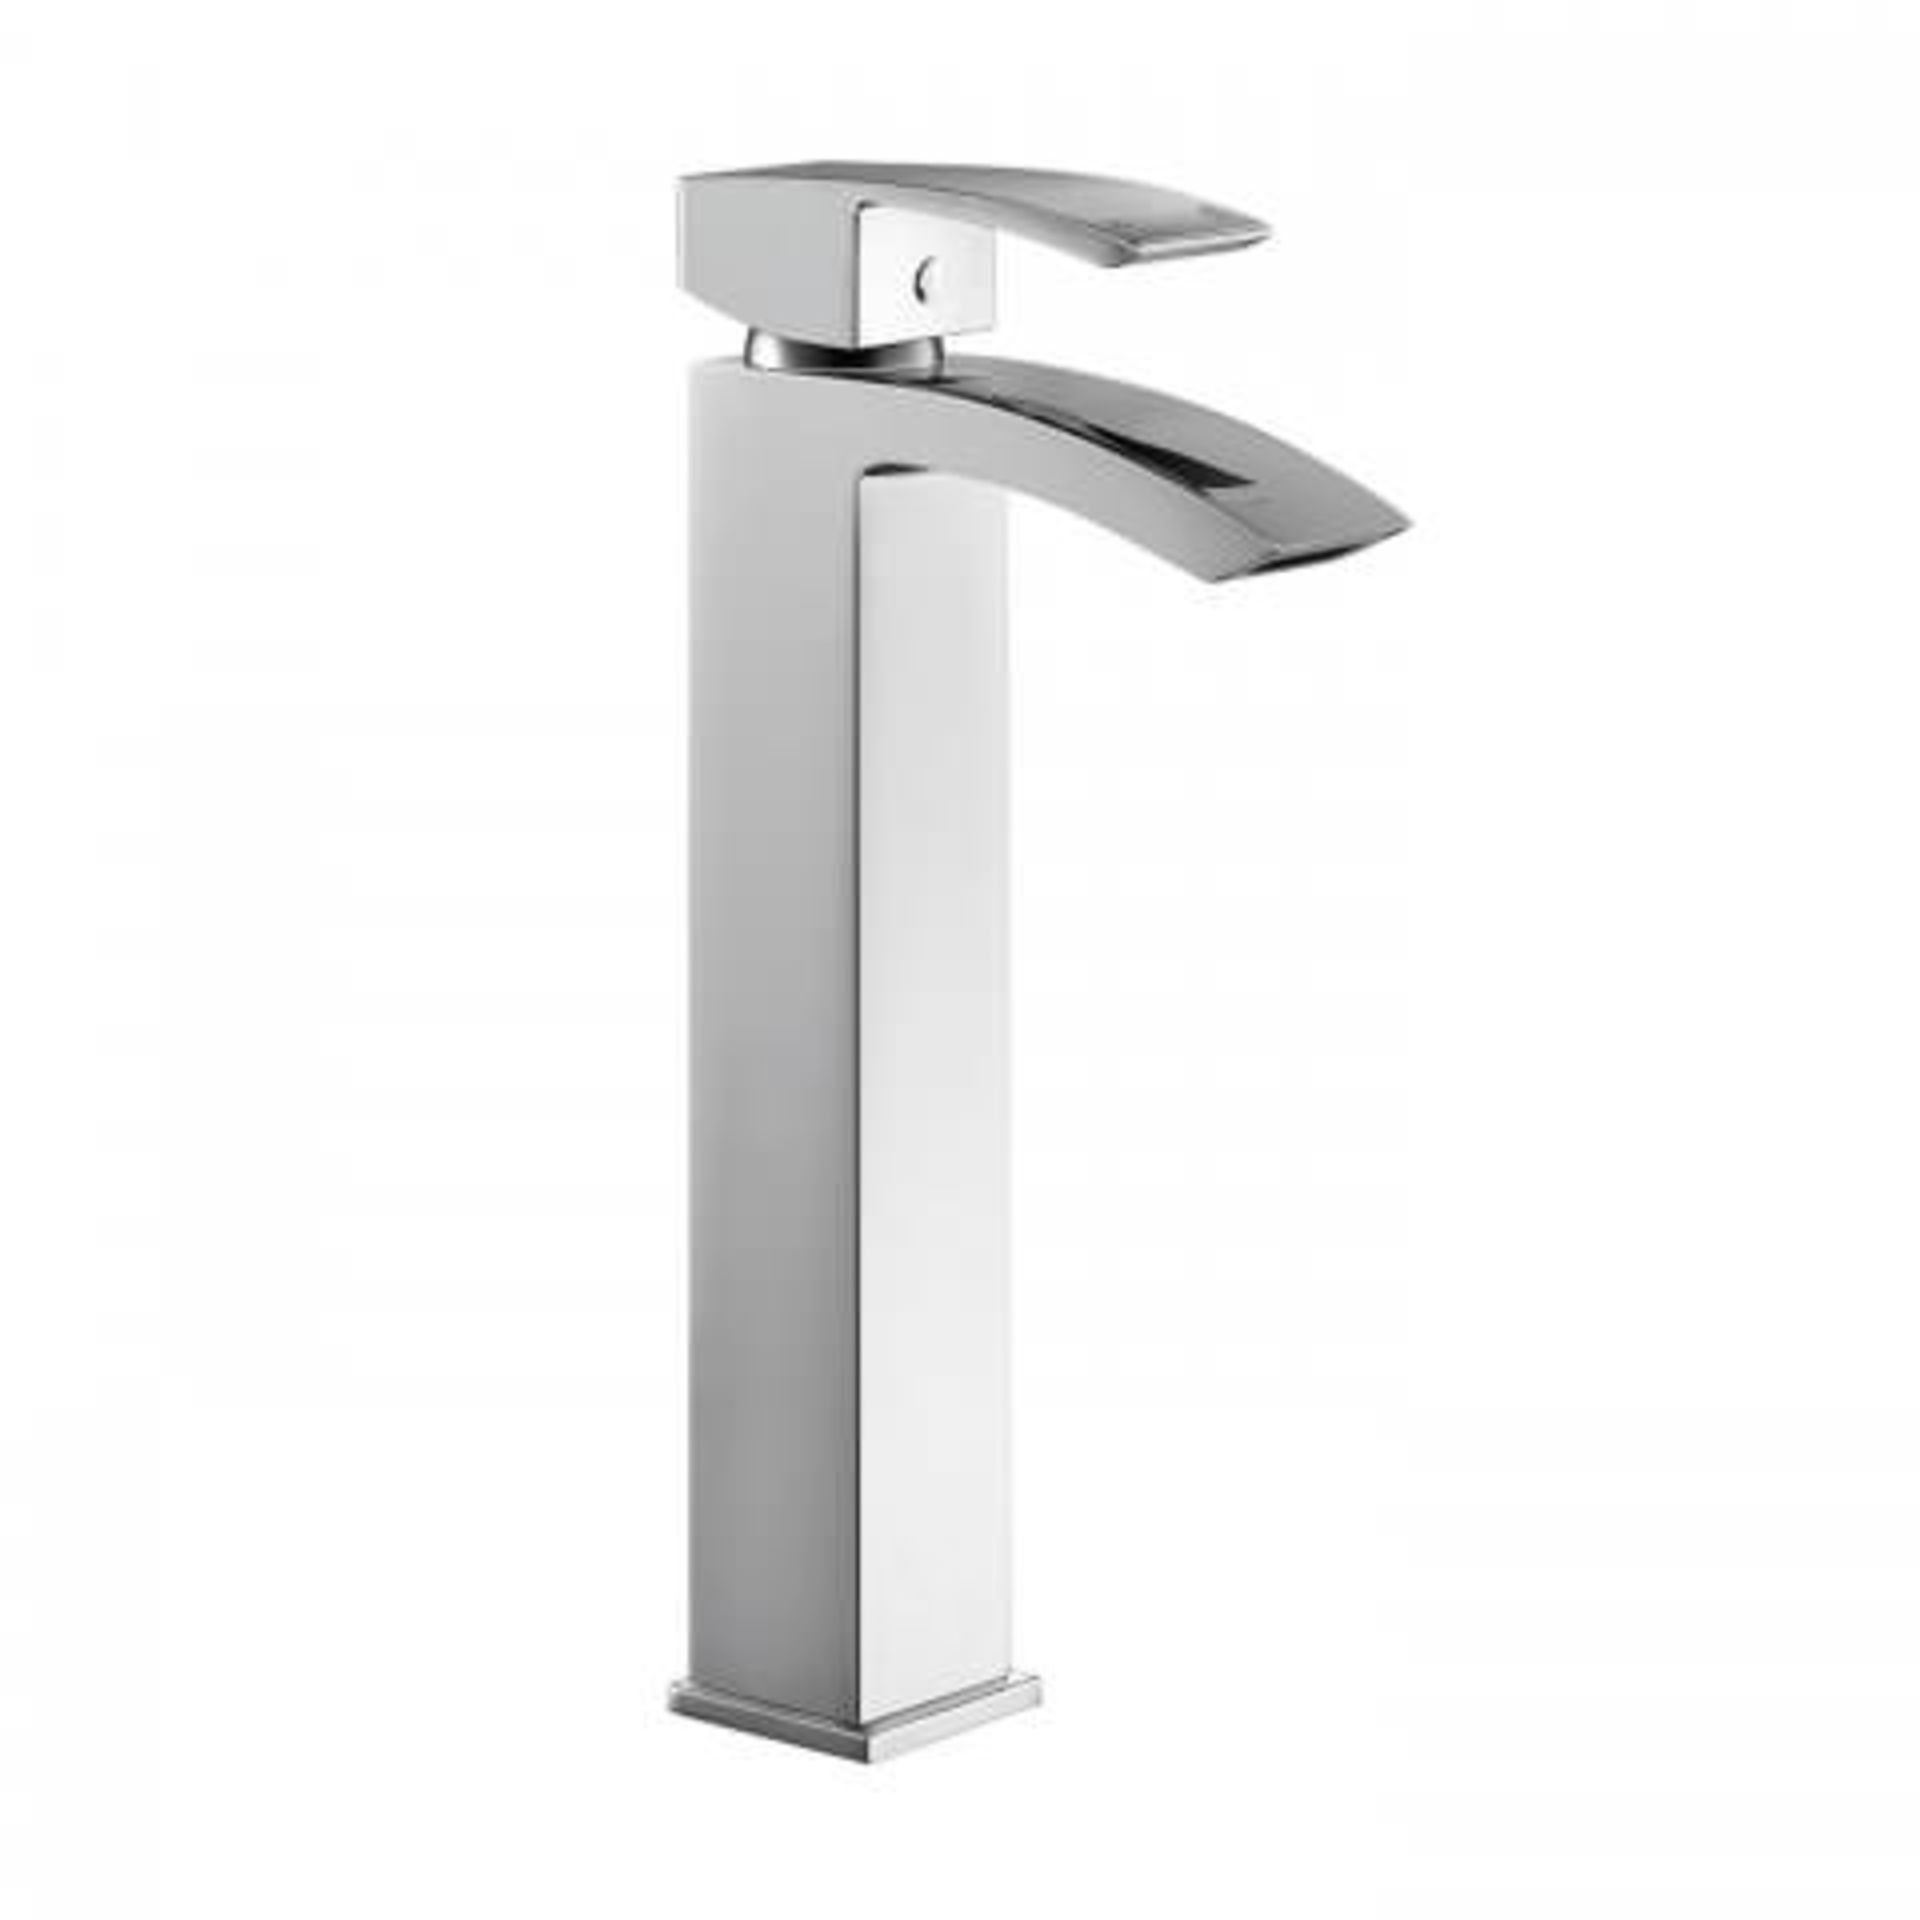 (V105) Keila Counter Top Basin Mixer Tap Countertop Elegance Our counter top tap proves to be an - Image 3 of 3